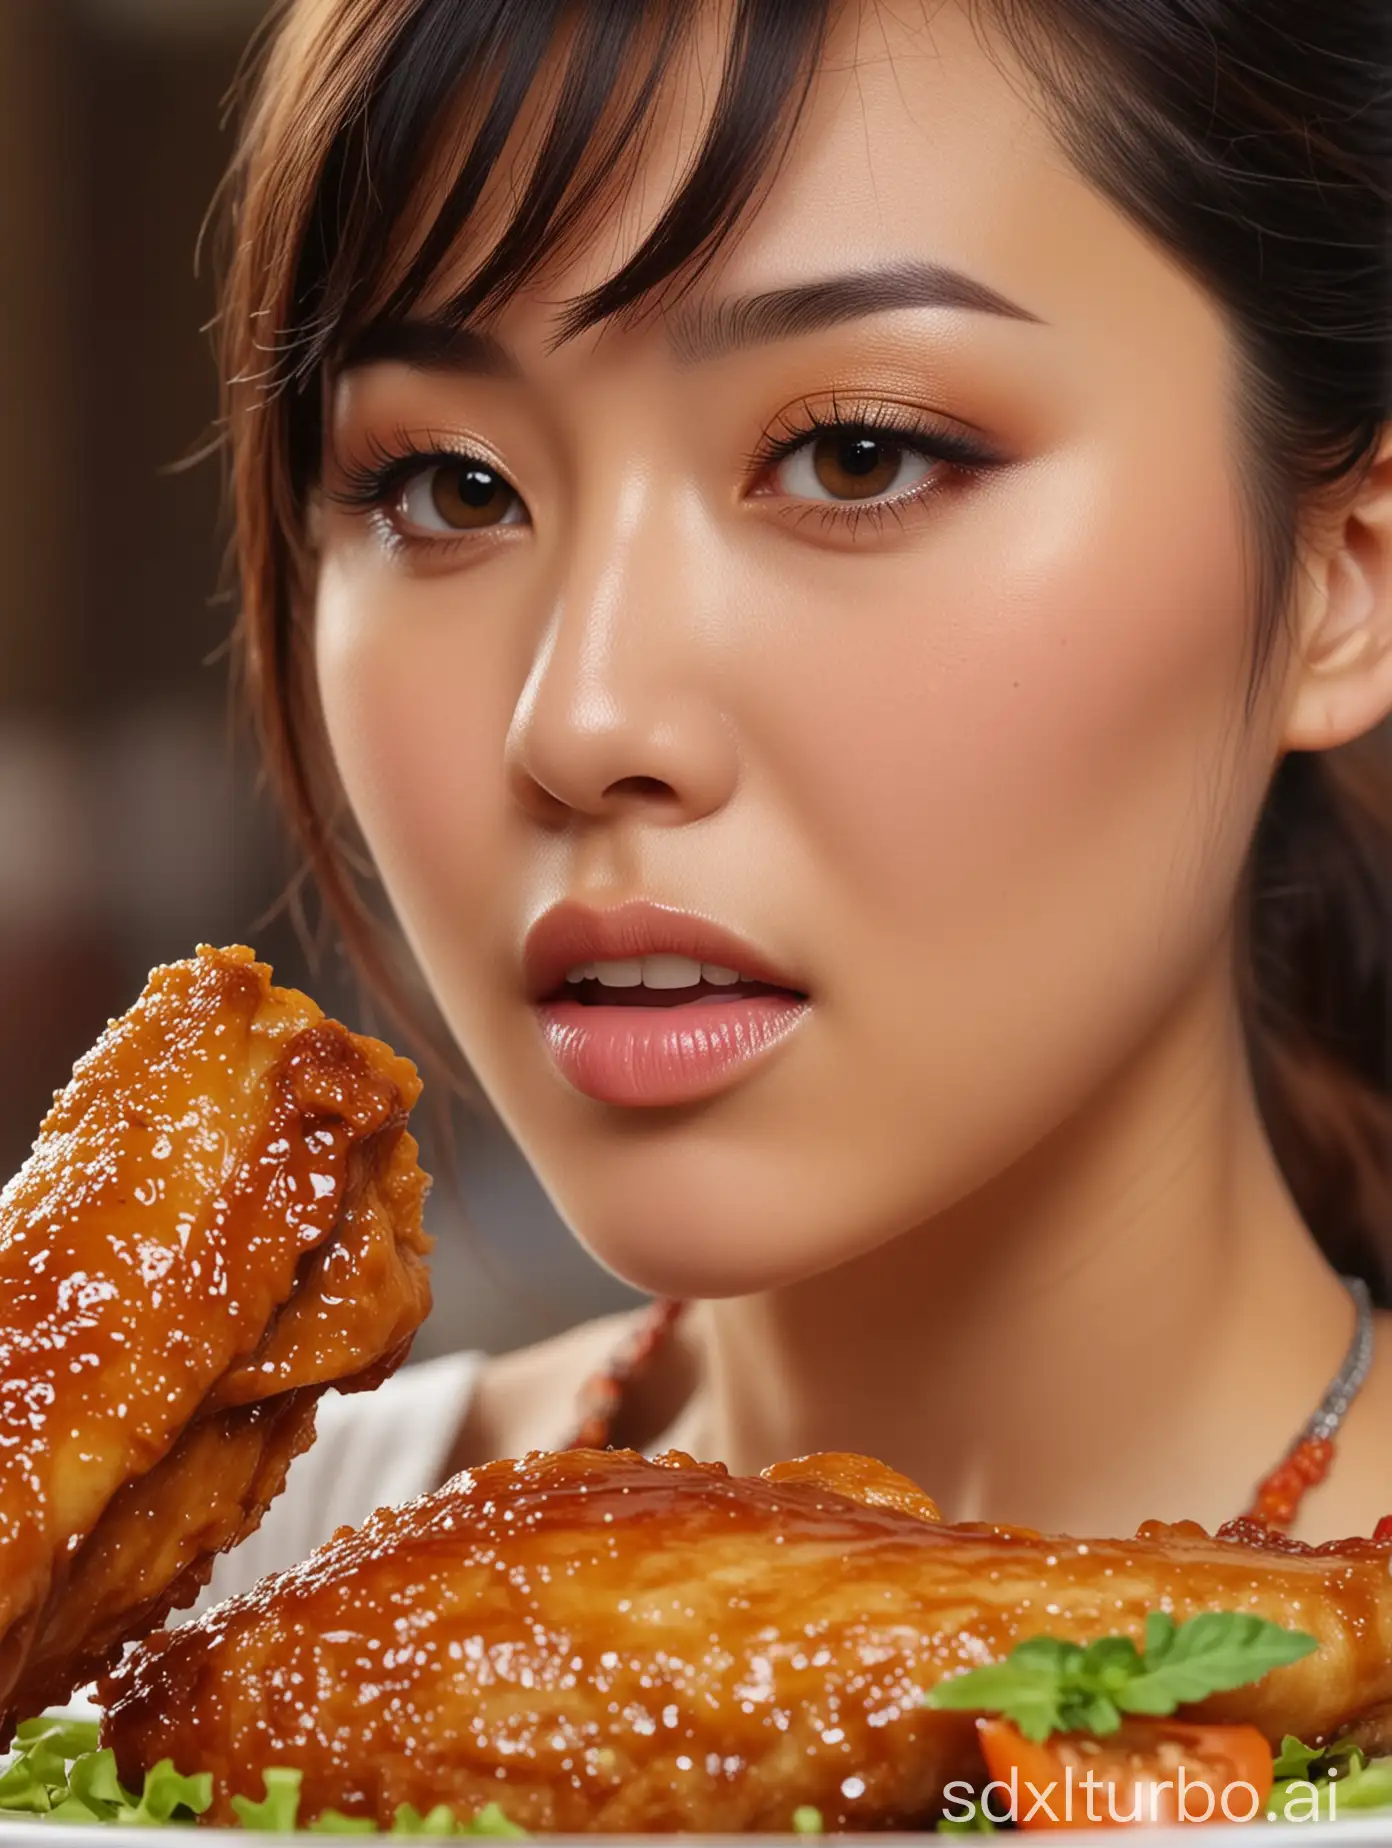 Fashionable-Chinese-Woman-Enjoying-New-Orleans-Flavored-Chicken-Wing-in-HighDefinition-CloseUp